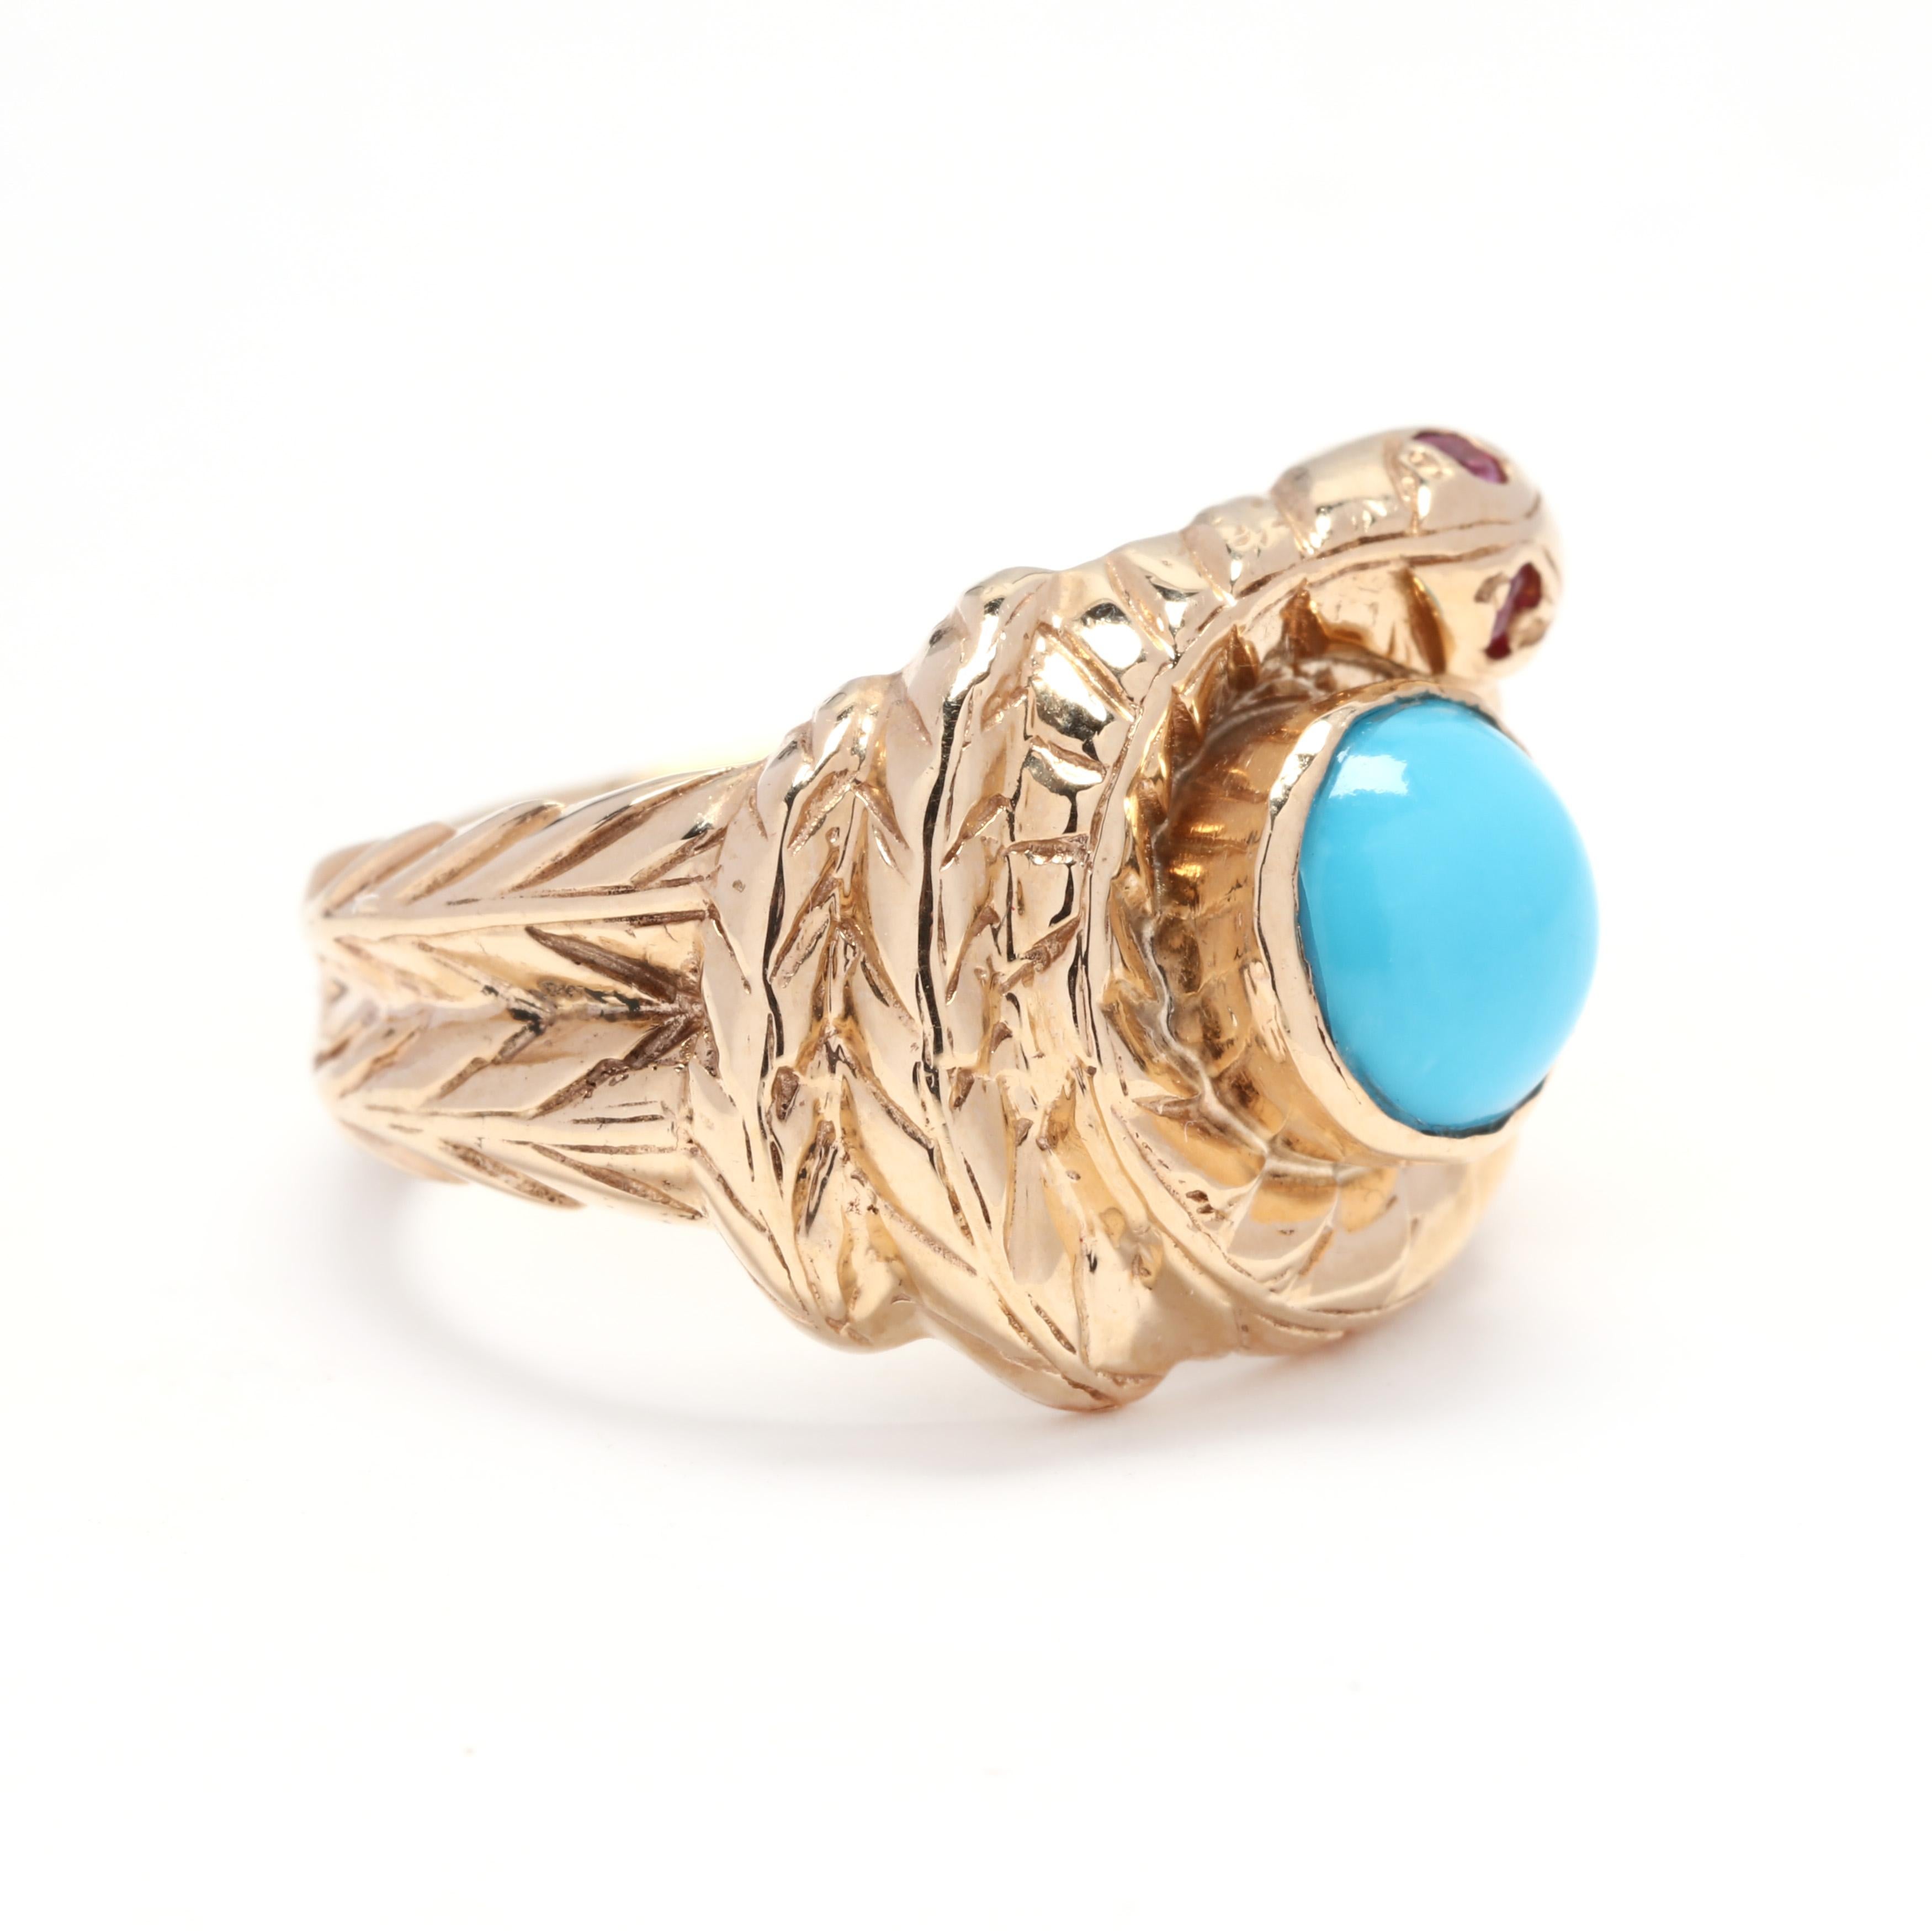 A 14 karat yellow gold, turquoise and ruby coiled snake ring. This ring features a textured coiled snake design centered around a bezel set round cabochon turquoise stone and with two round cut rubies for eyes.

Stones:
- turquoise, 1 stone
- round